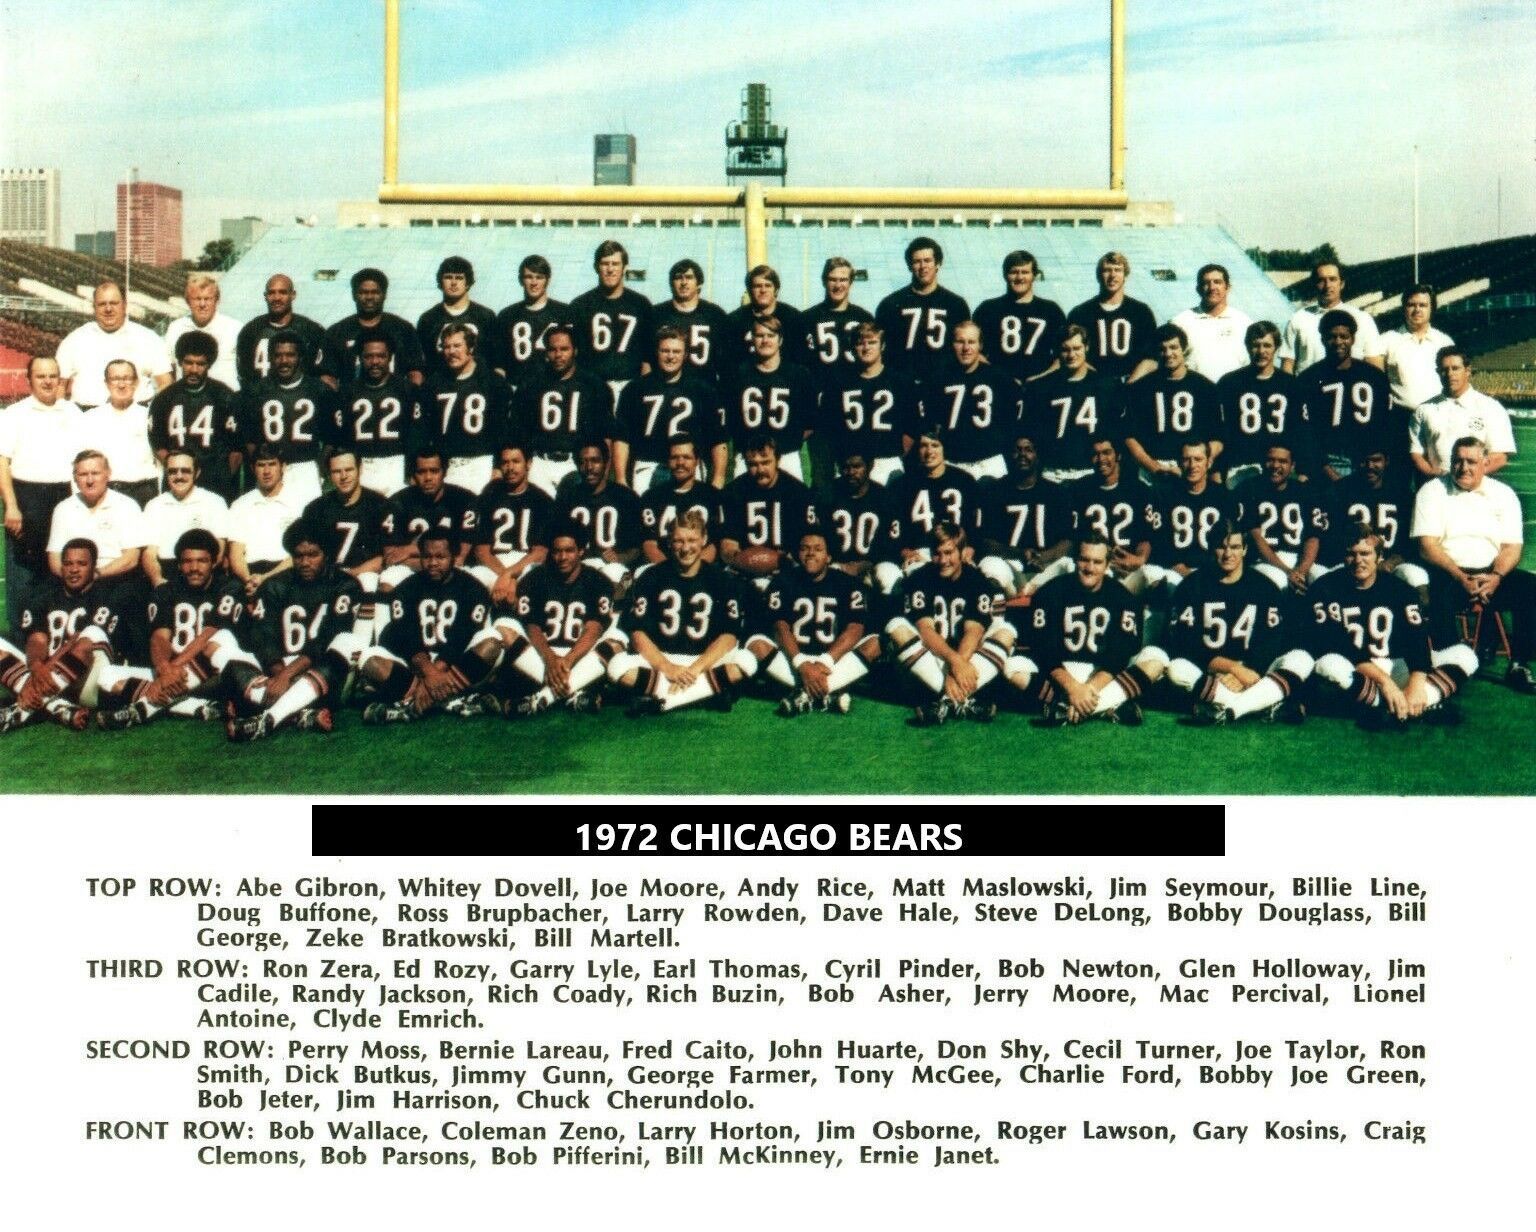 1972 CHICAGO BEARS 8X10 TEAM PHOTO FOOTBALL PICTURE NFL - $4.94